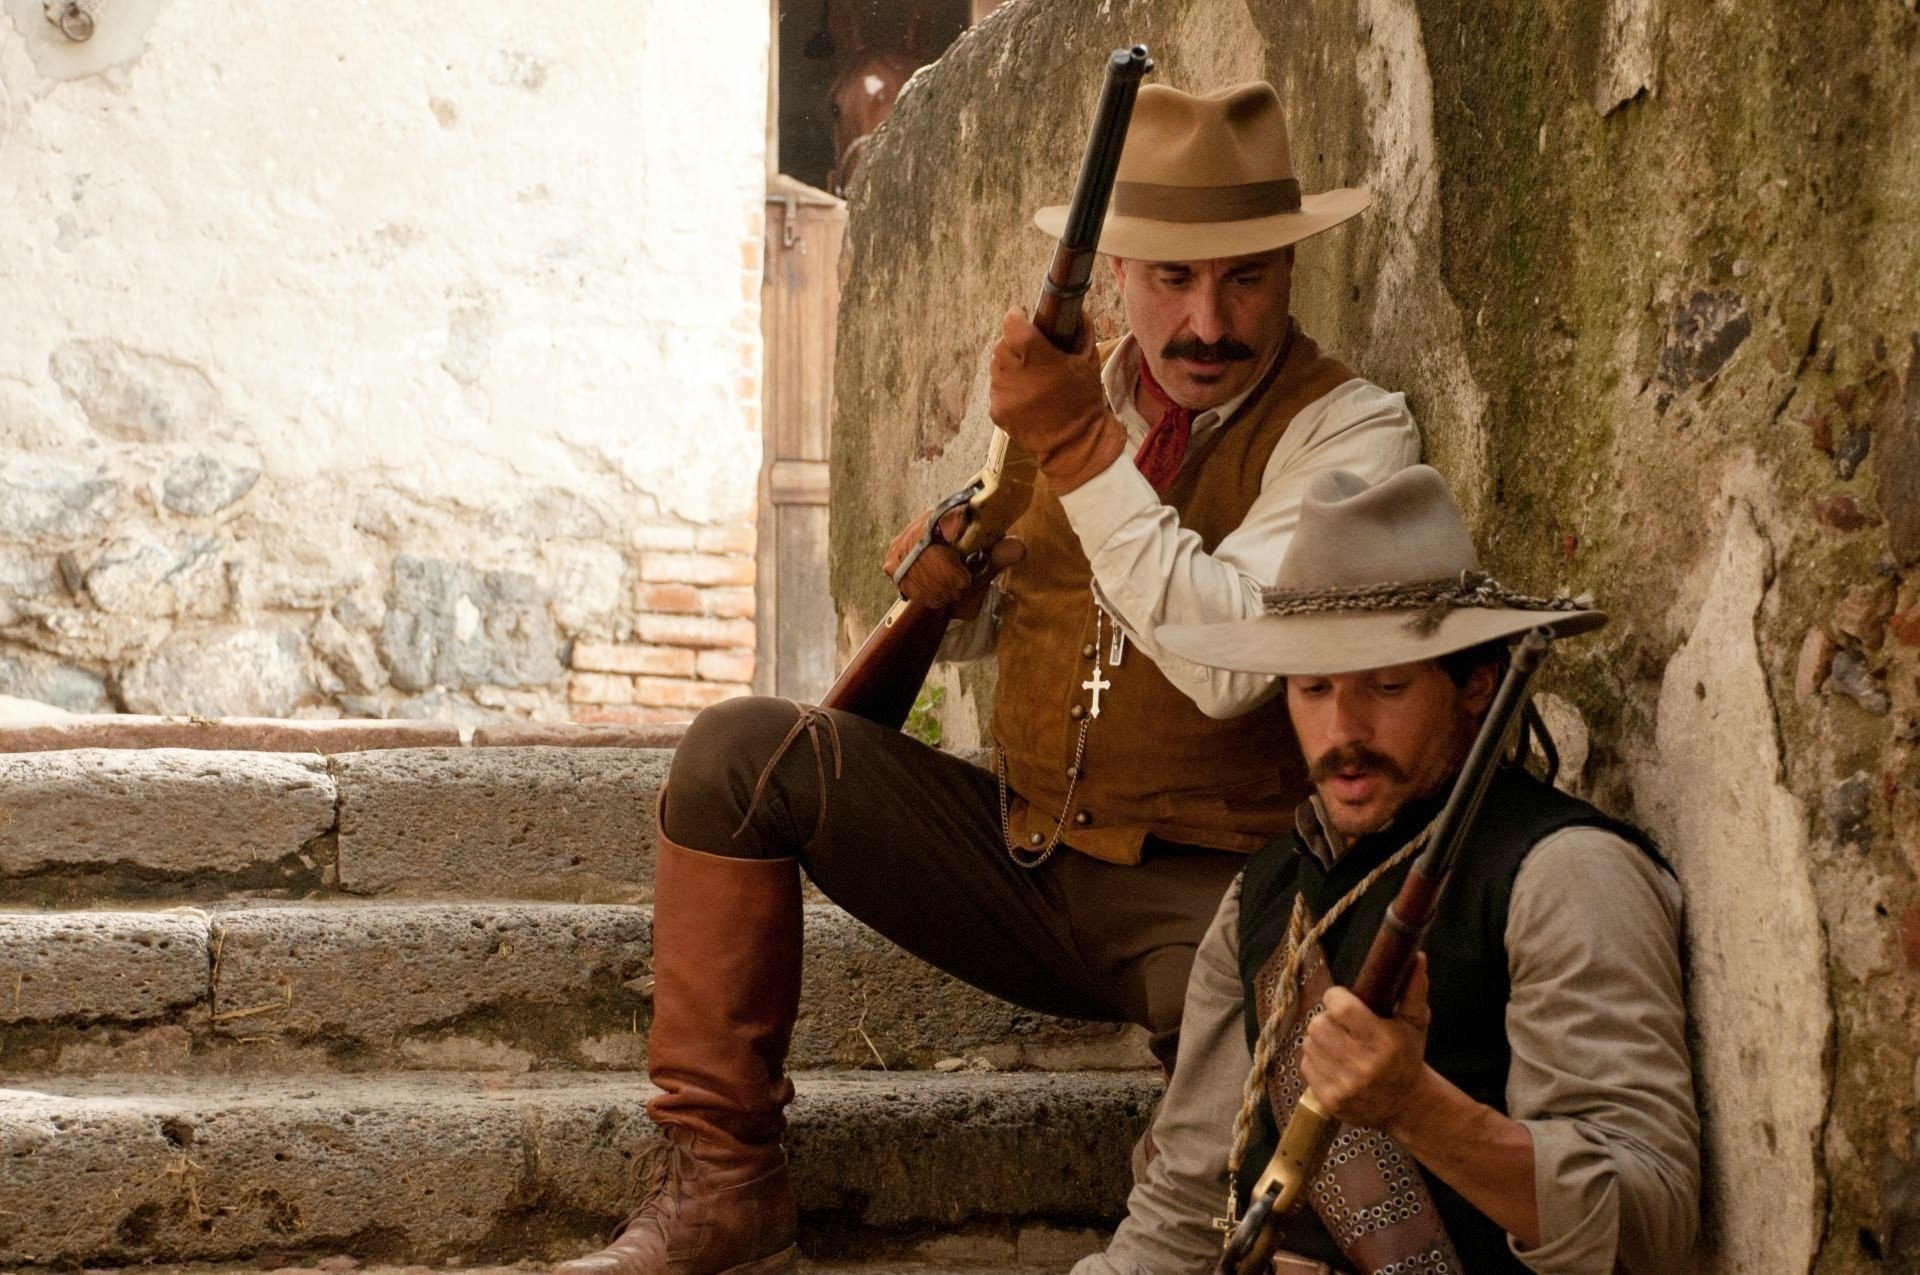 Andy Garcia stars as Enrique Gorostieta Velarde and Santiago Cabrera stars as Father Vega in ARC Entertainment's For Greater Glory (2012). Photo credit by Hana Matsumoto.